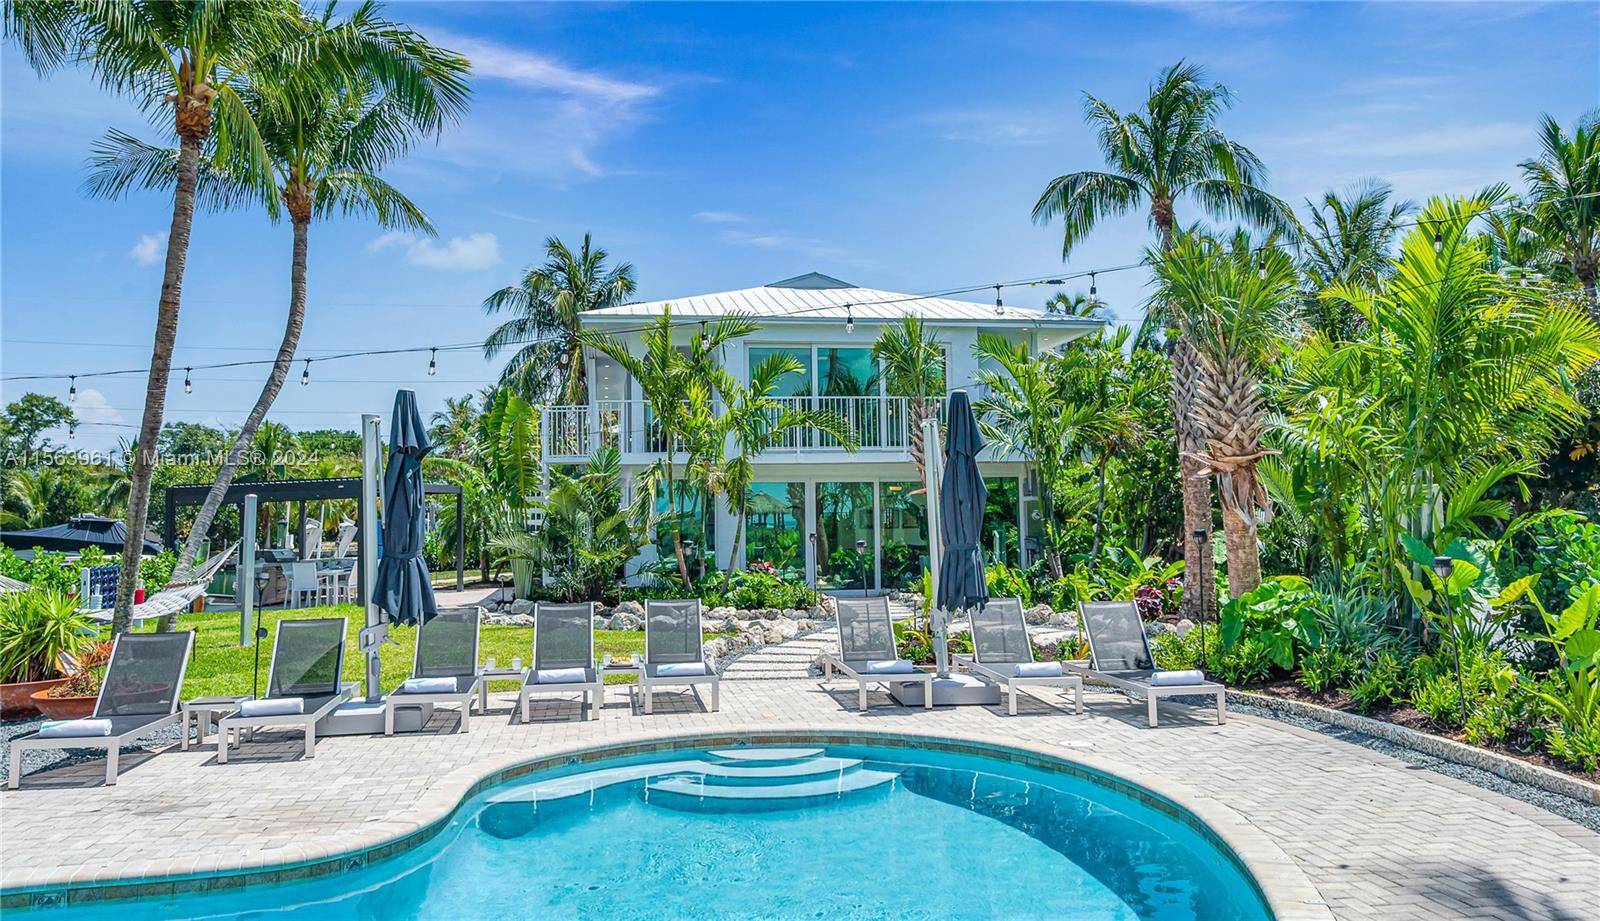 This grand peninsula retreat is embraced by the Ocean and lush mangroves, offering privacy to the heated pool with its tiki bar, expansive sandy playgrounds and lounge areas.